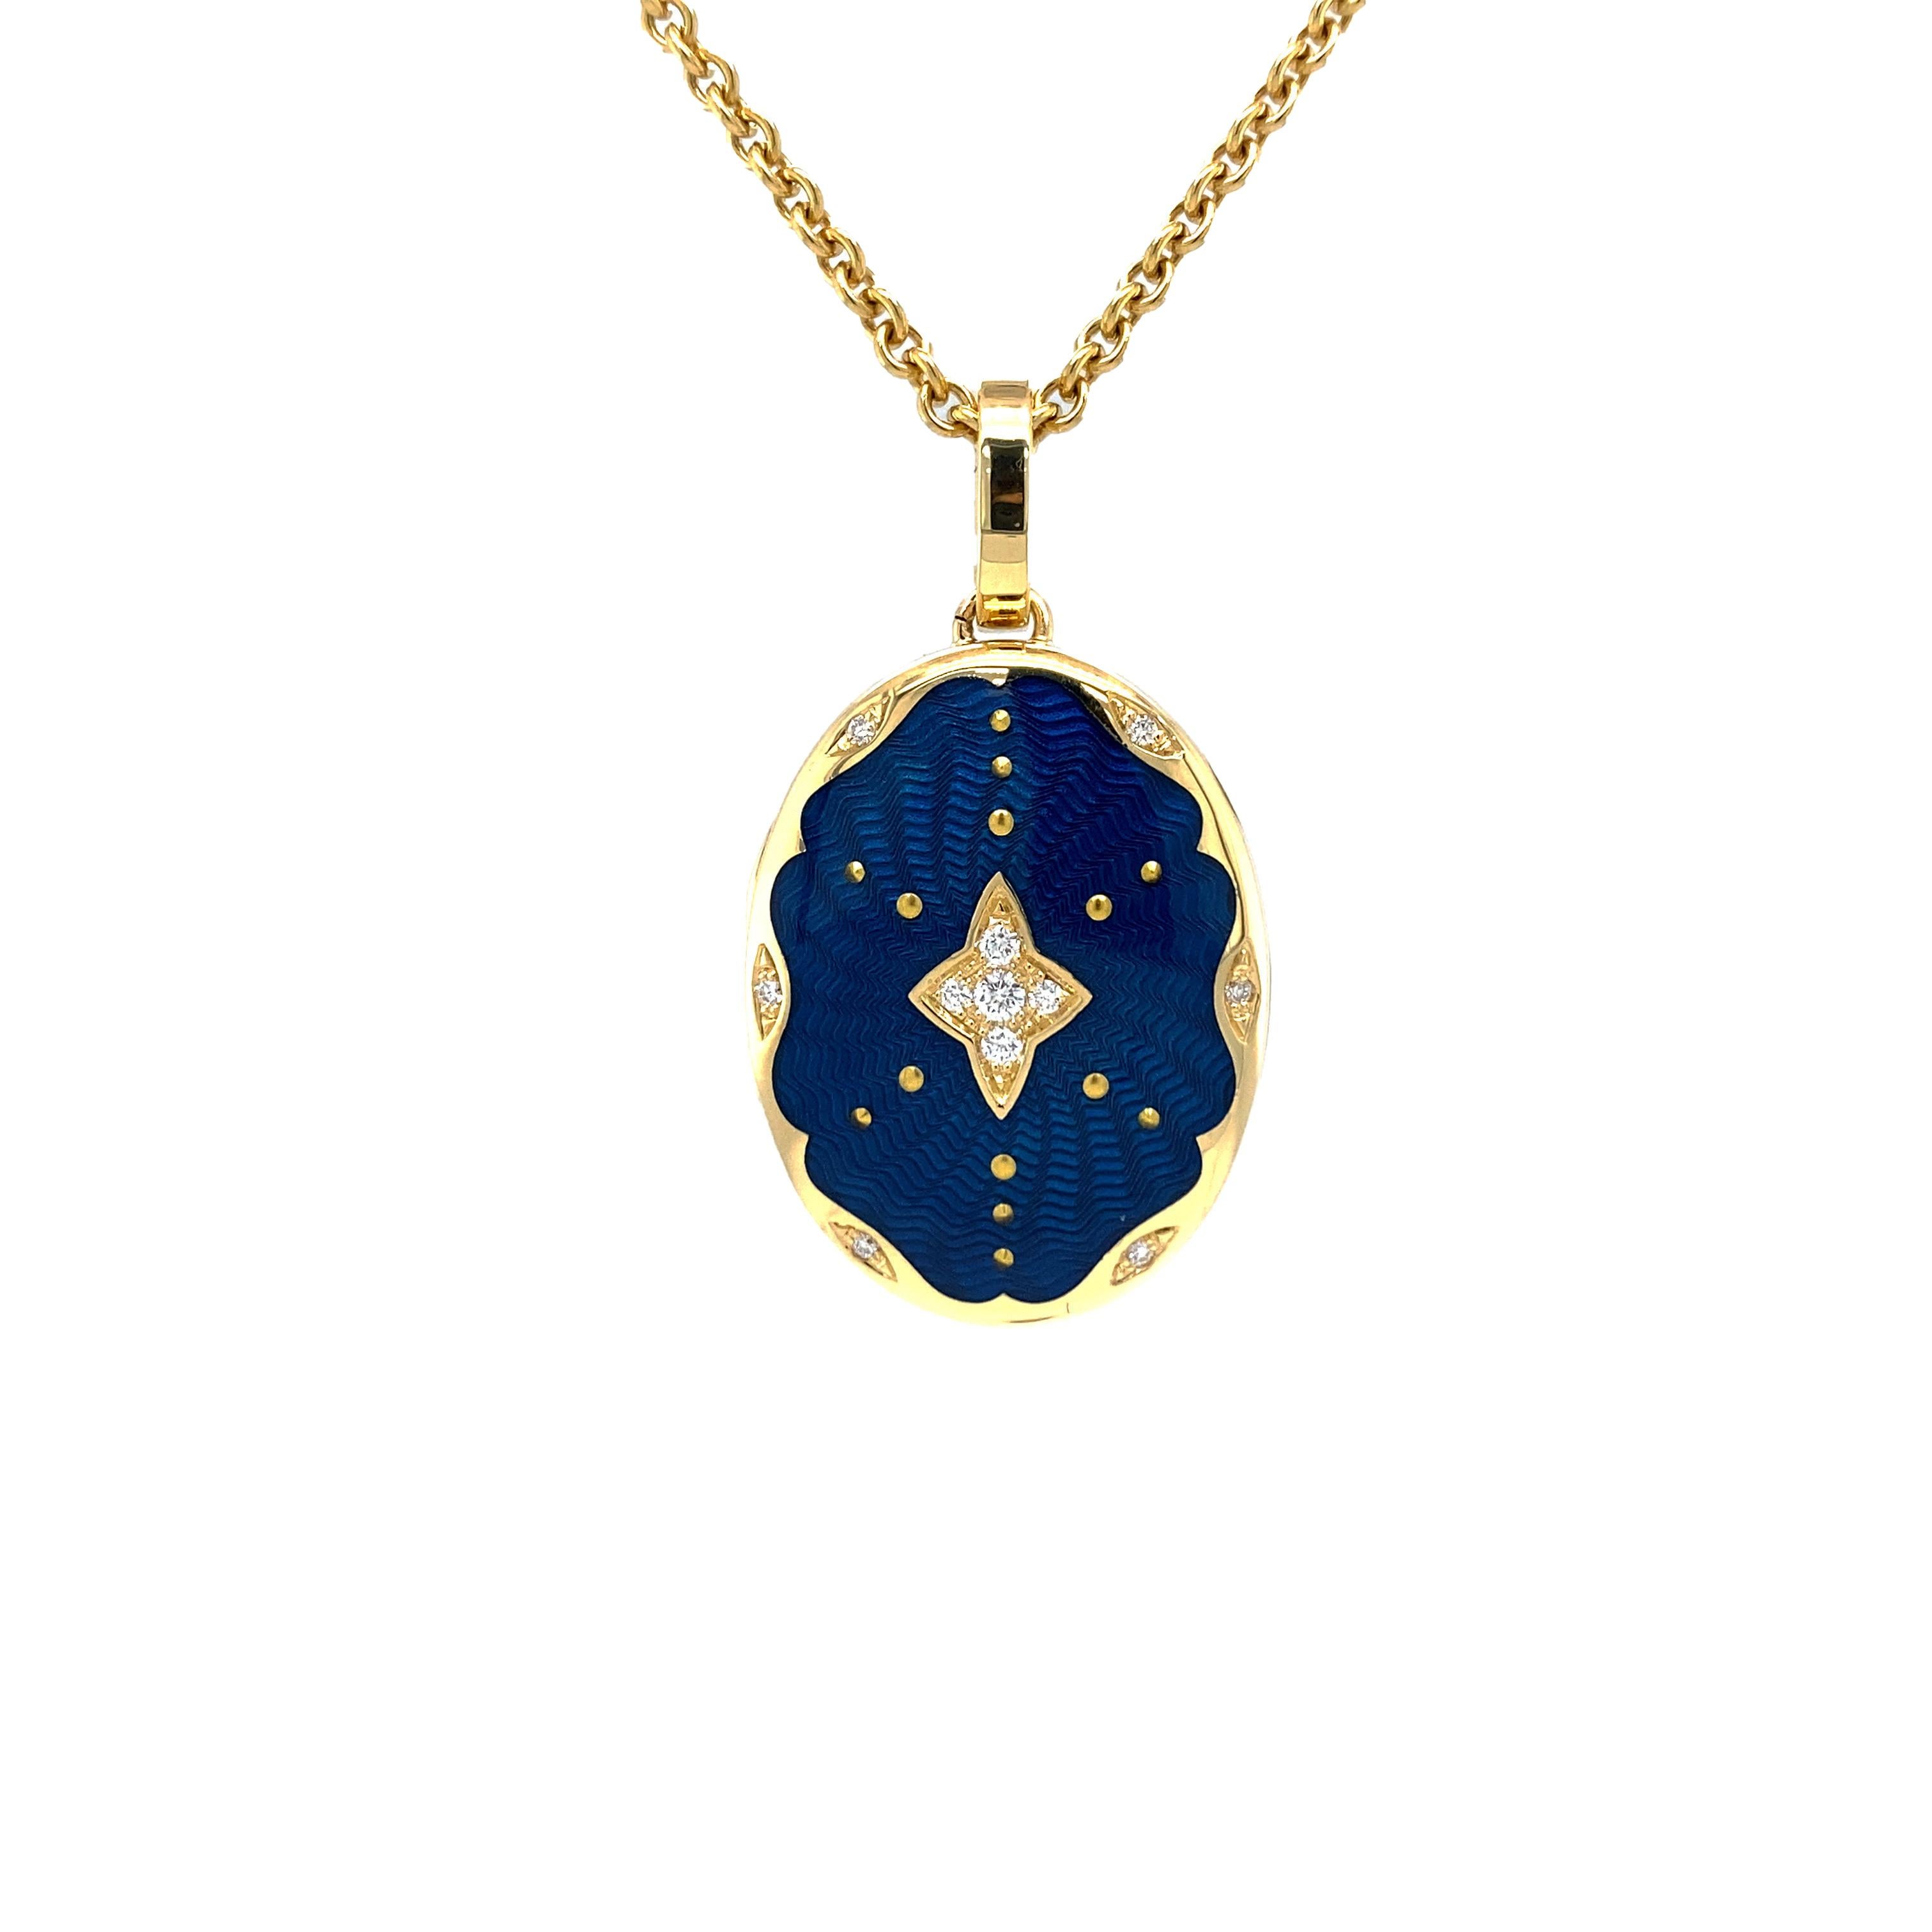 Victor Mayer customizable oval locket pendant with star, 18k yellow gold, Victoria Collection, translucent peacock blue vitreous enamel, gold paillons, 11 diamonds total 0.12 ct, G VS brilliant cut, measurements app. 17.0 mm x 27.0 mm

About the